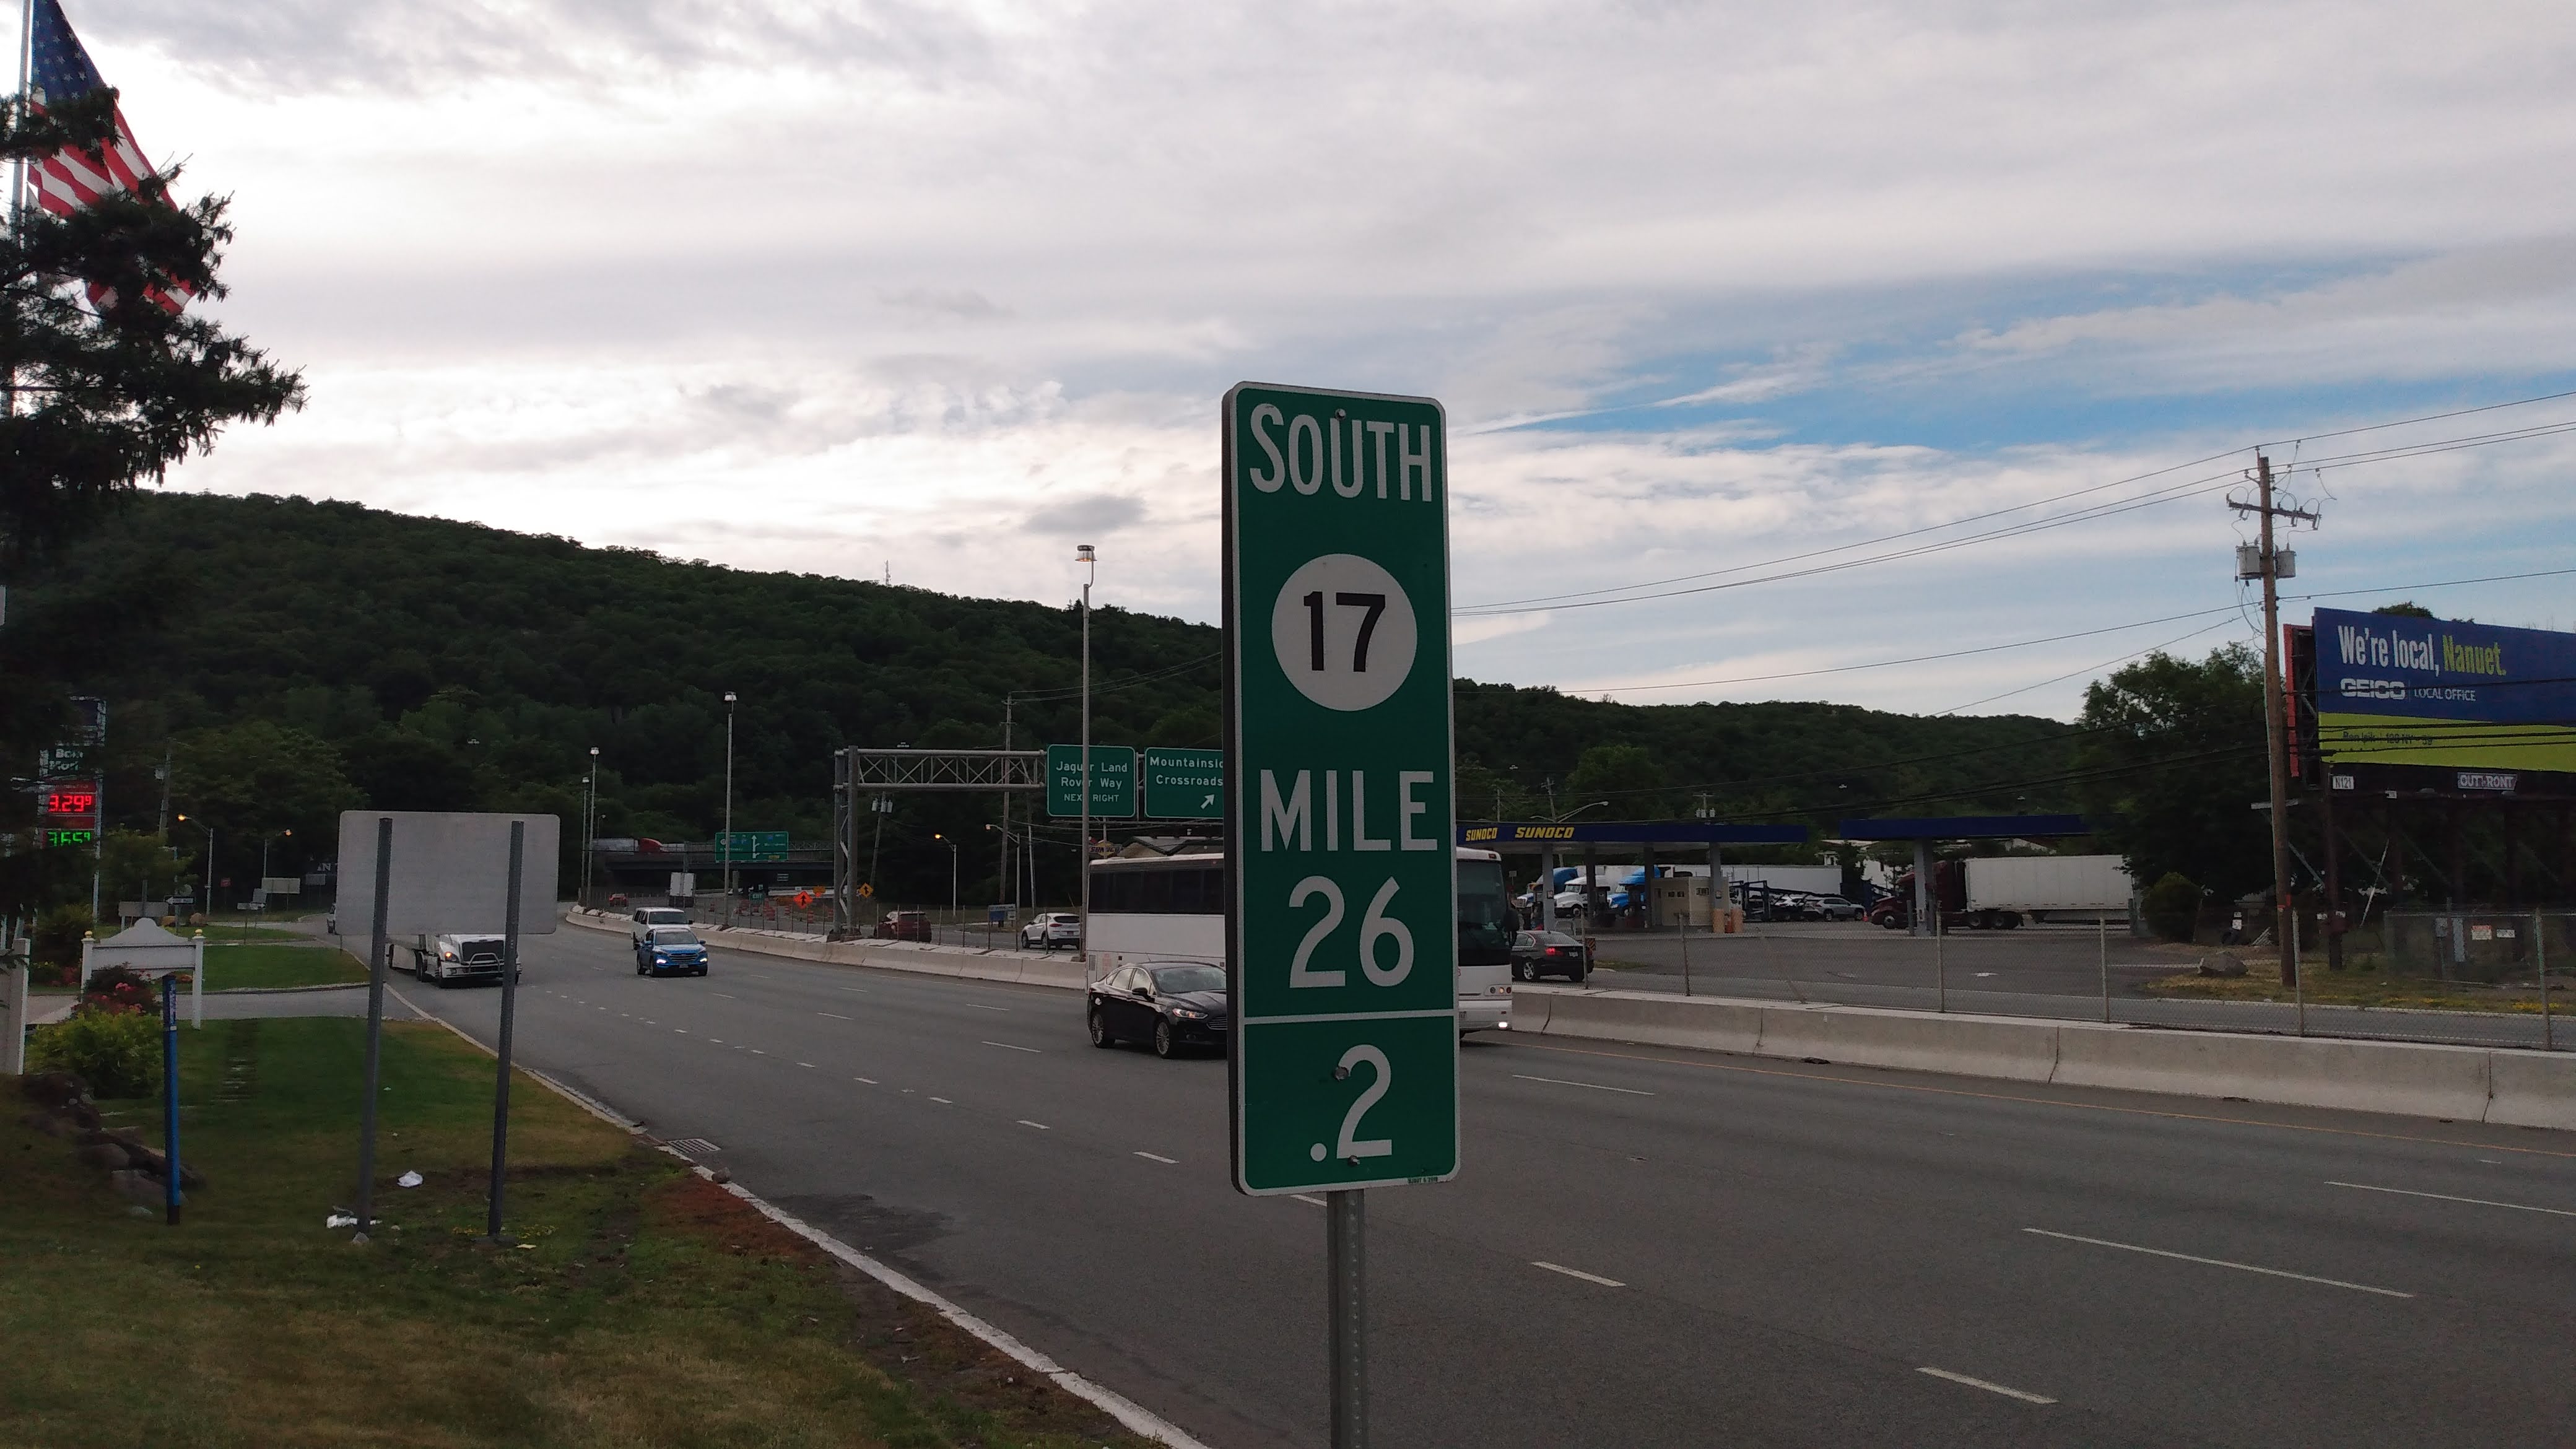 Route 17 in Mahway, New Jersey between US 202 and I-287.